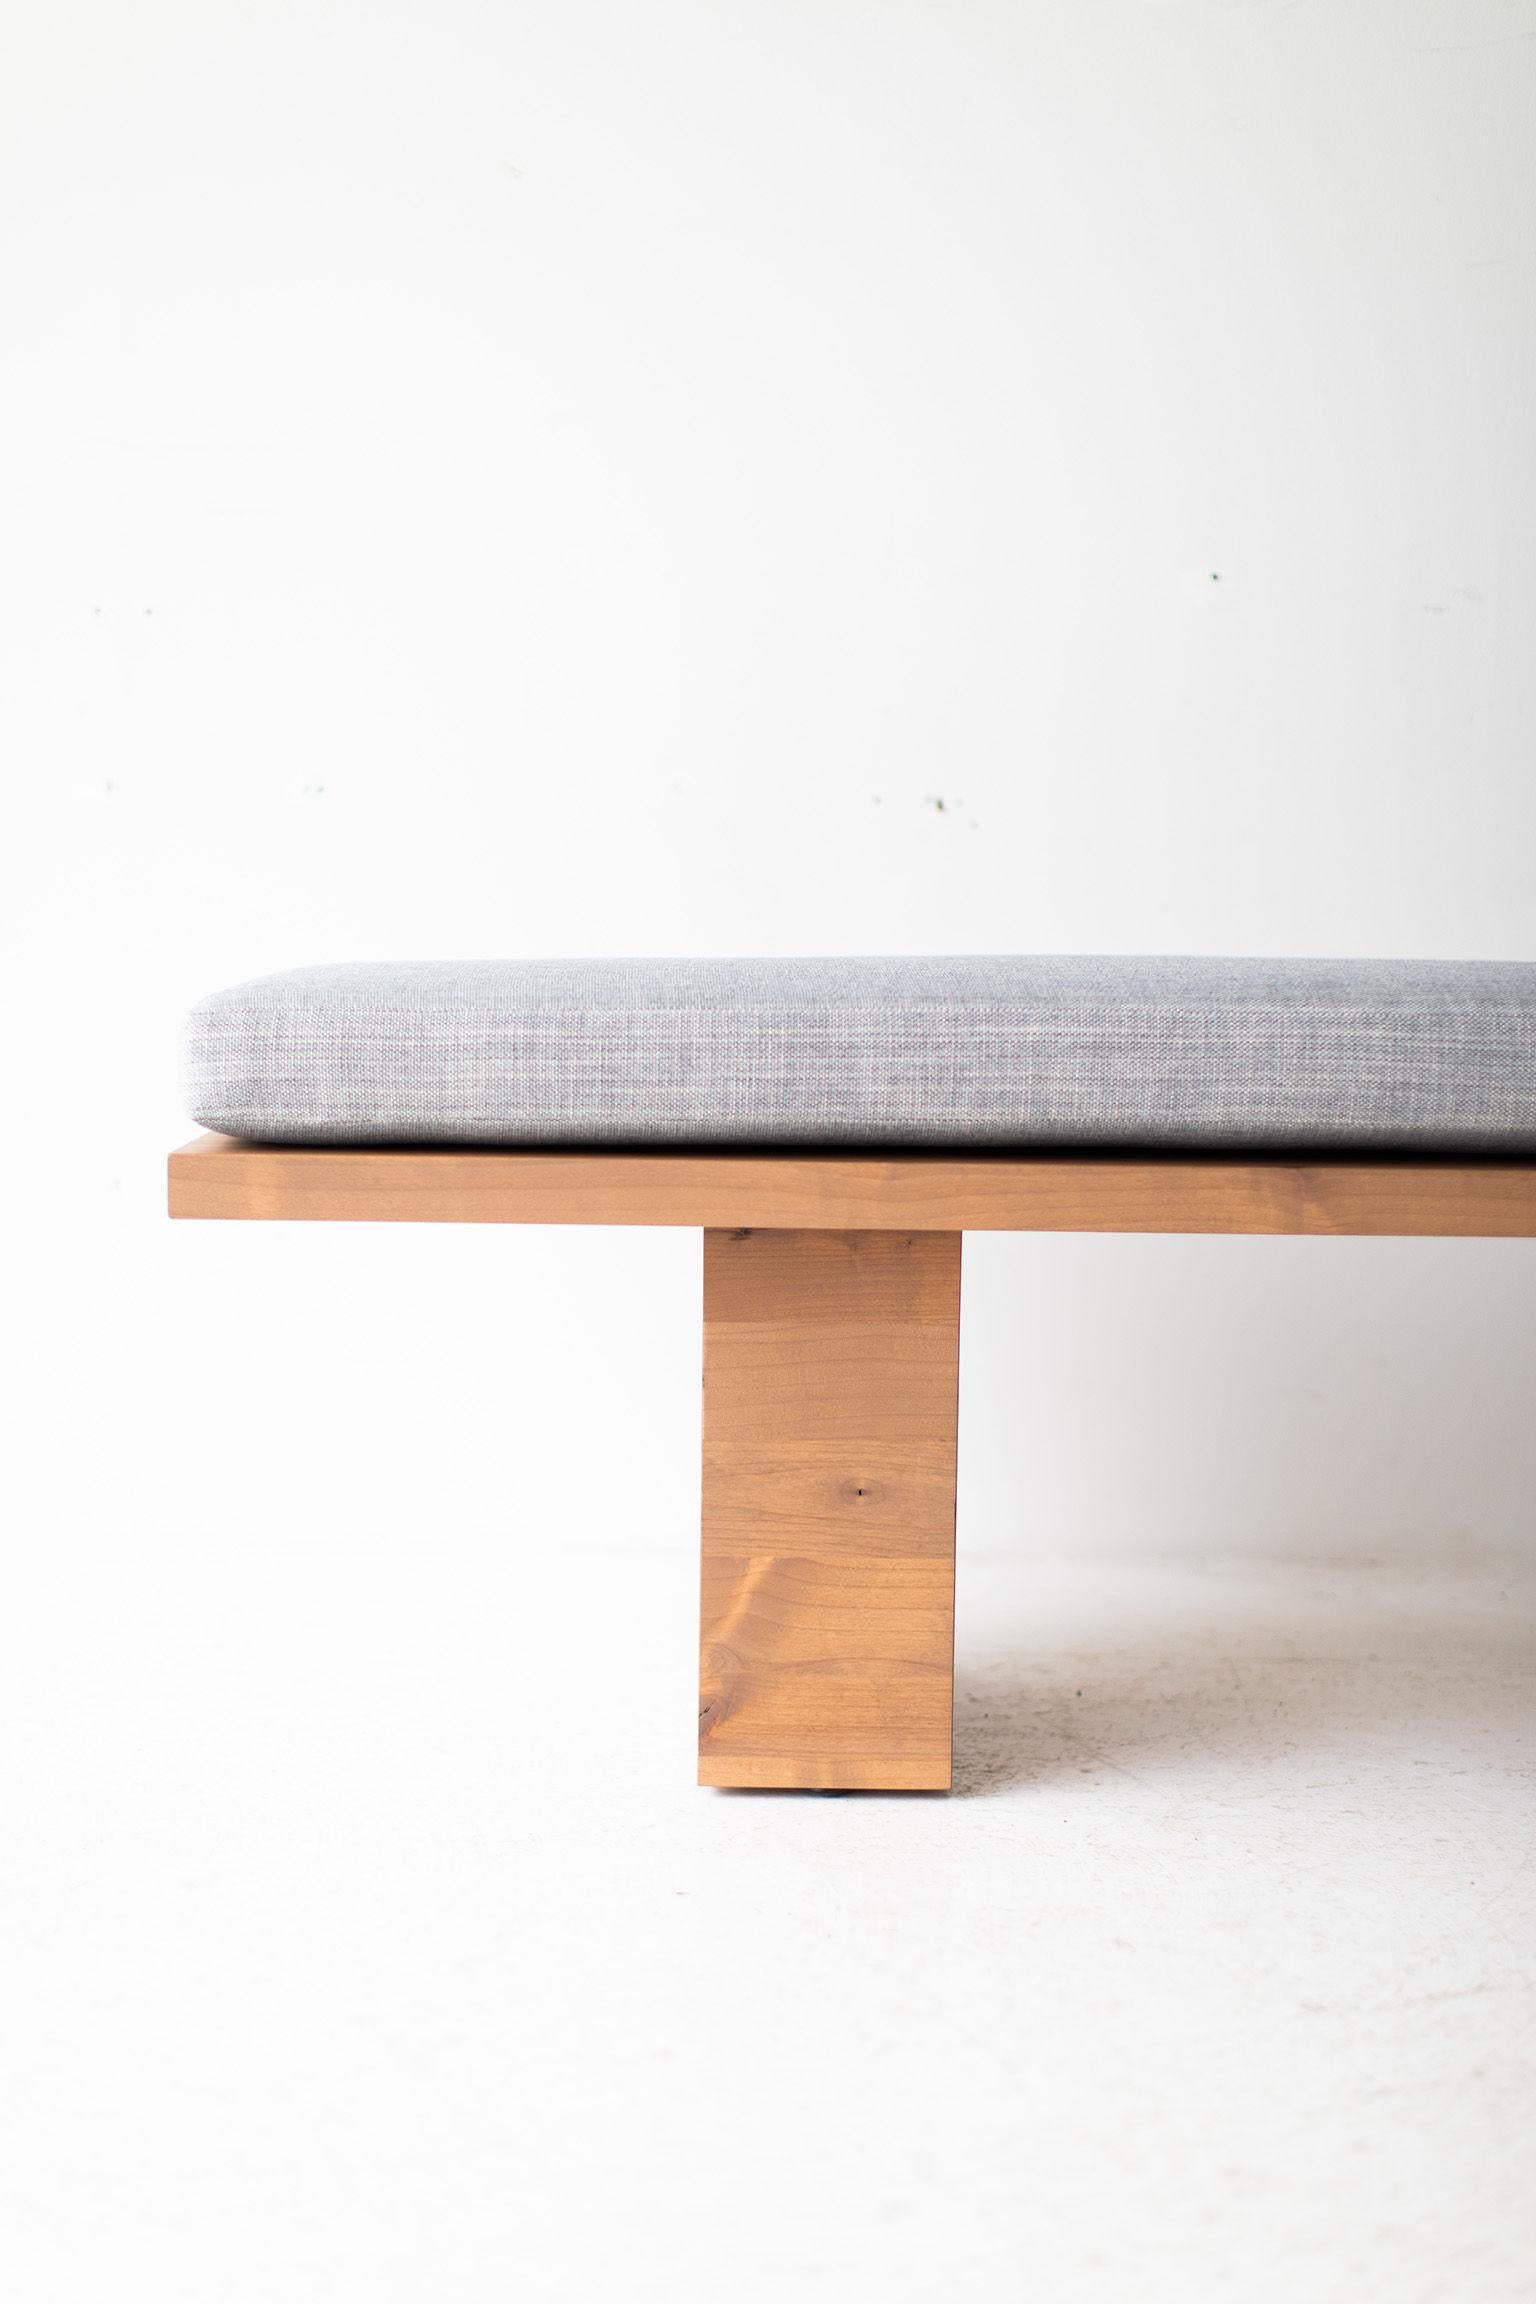 Bertu Bench, Suelo Modern Wood Bench, Upholstered, Thick Weave

This upholstered Suelo Modern Wood Bench is beautifully constructed from solid wood in Ohio, USA. This silhouette is simple, modern, and sleek, topped with a comfortable cushion. This